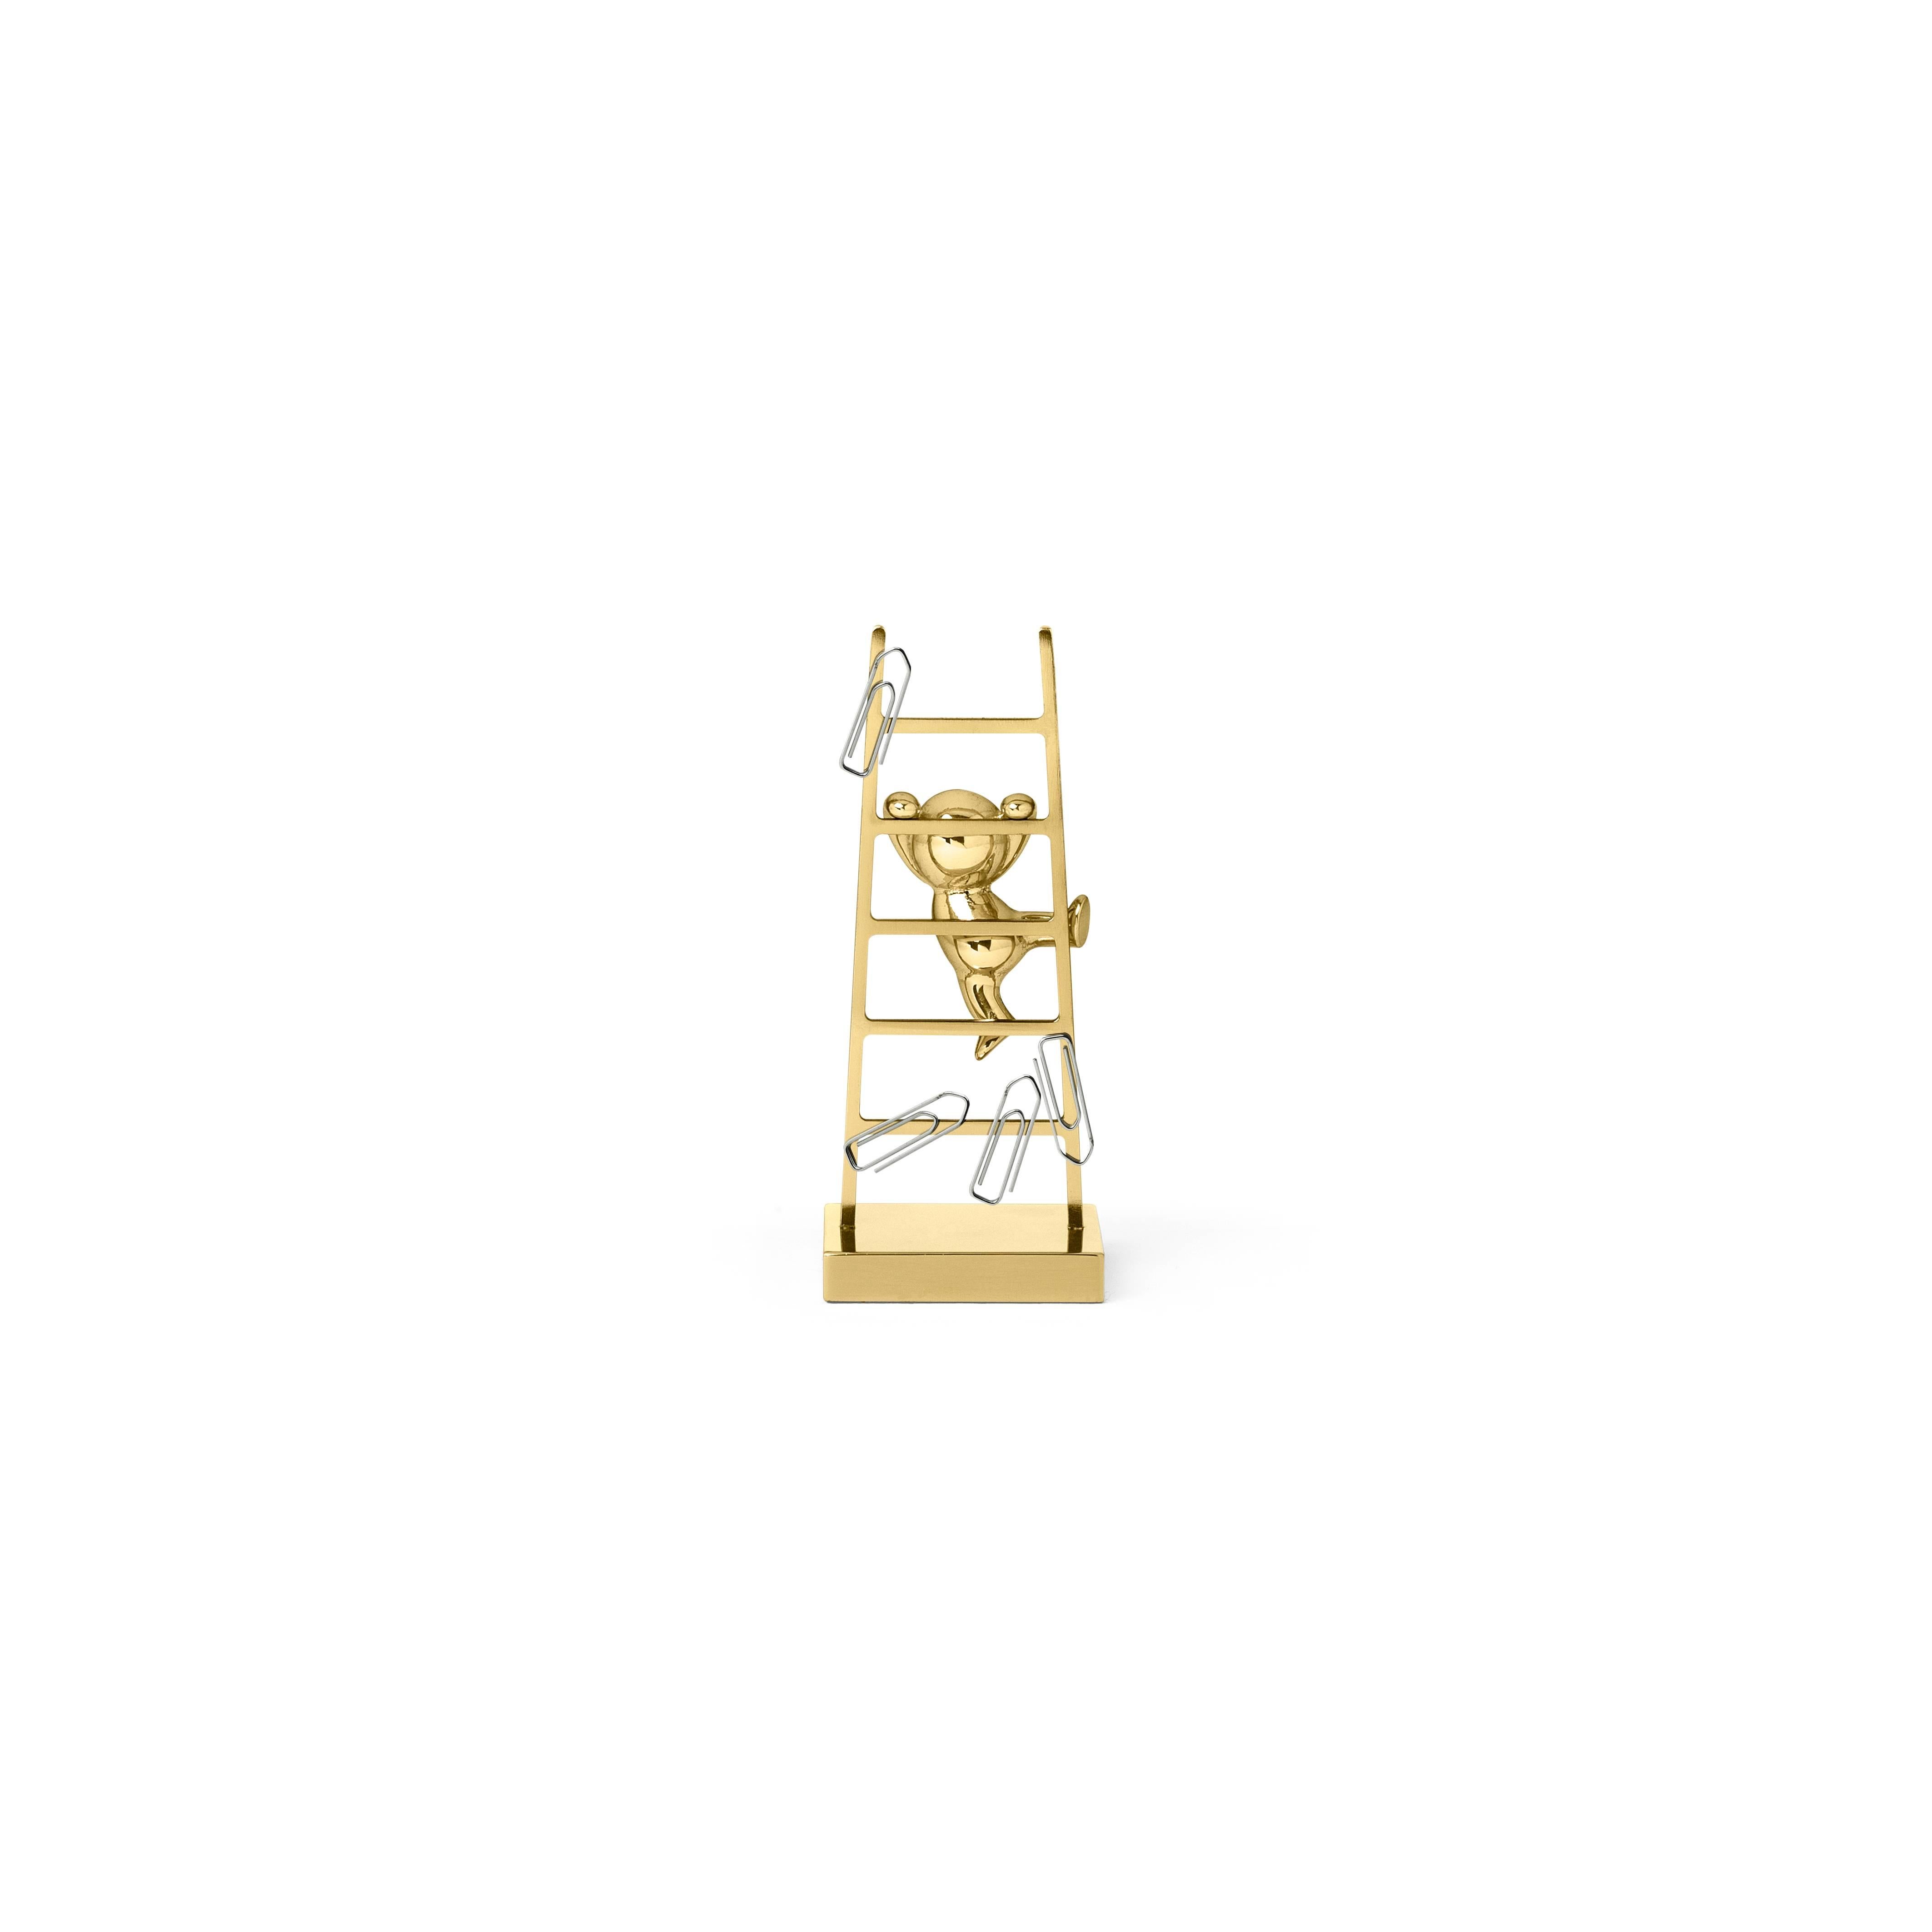 This unconventional paperclip holder is made of brass. This versatile piece features a small, stylized man climbing up a ladder that contains magnets, ensuring that all unruly paperclips scattered across a desk are well stored in one place.